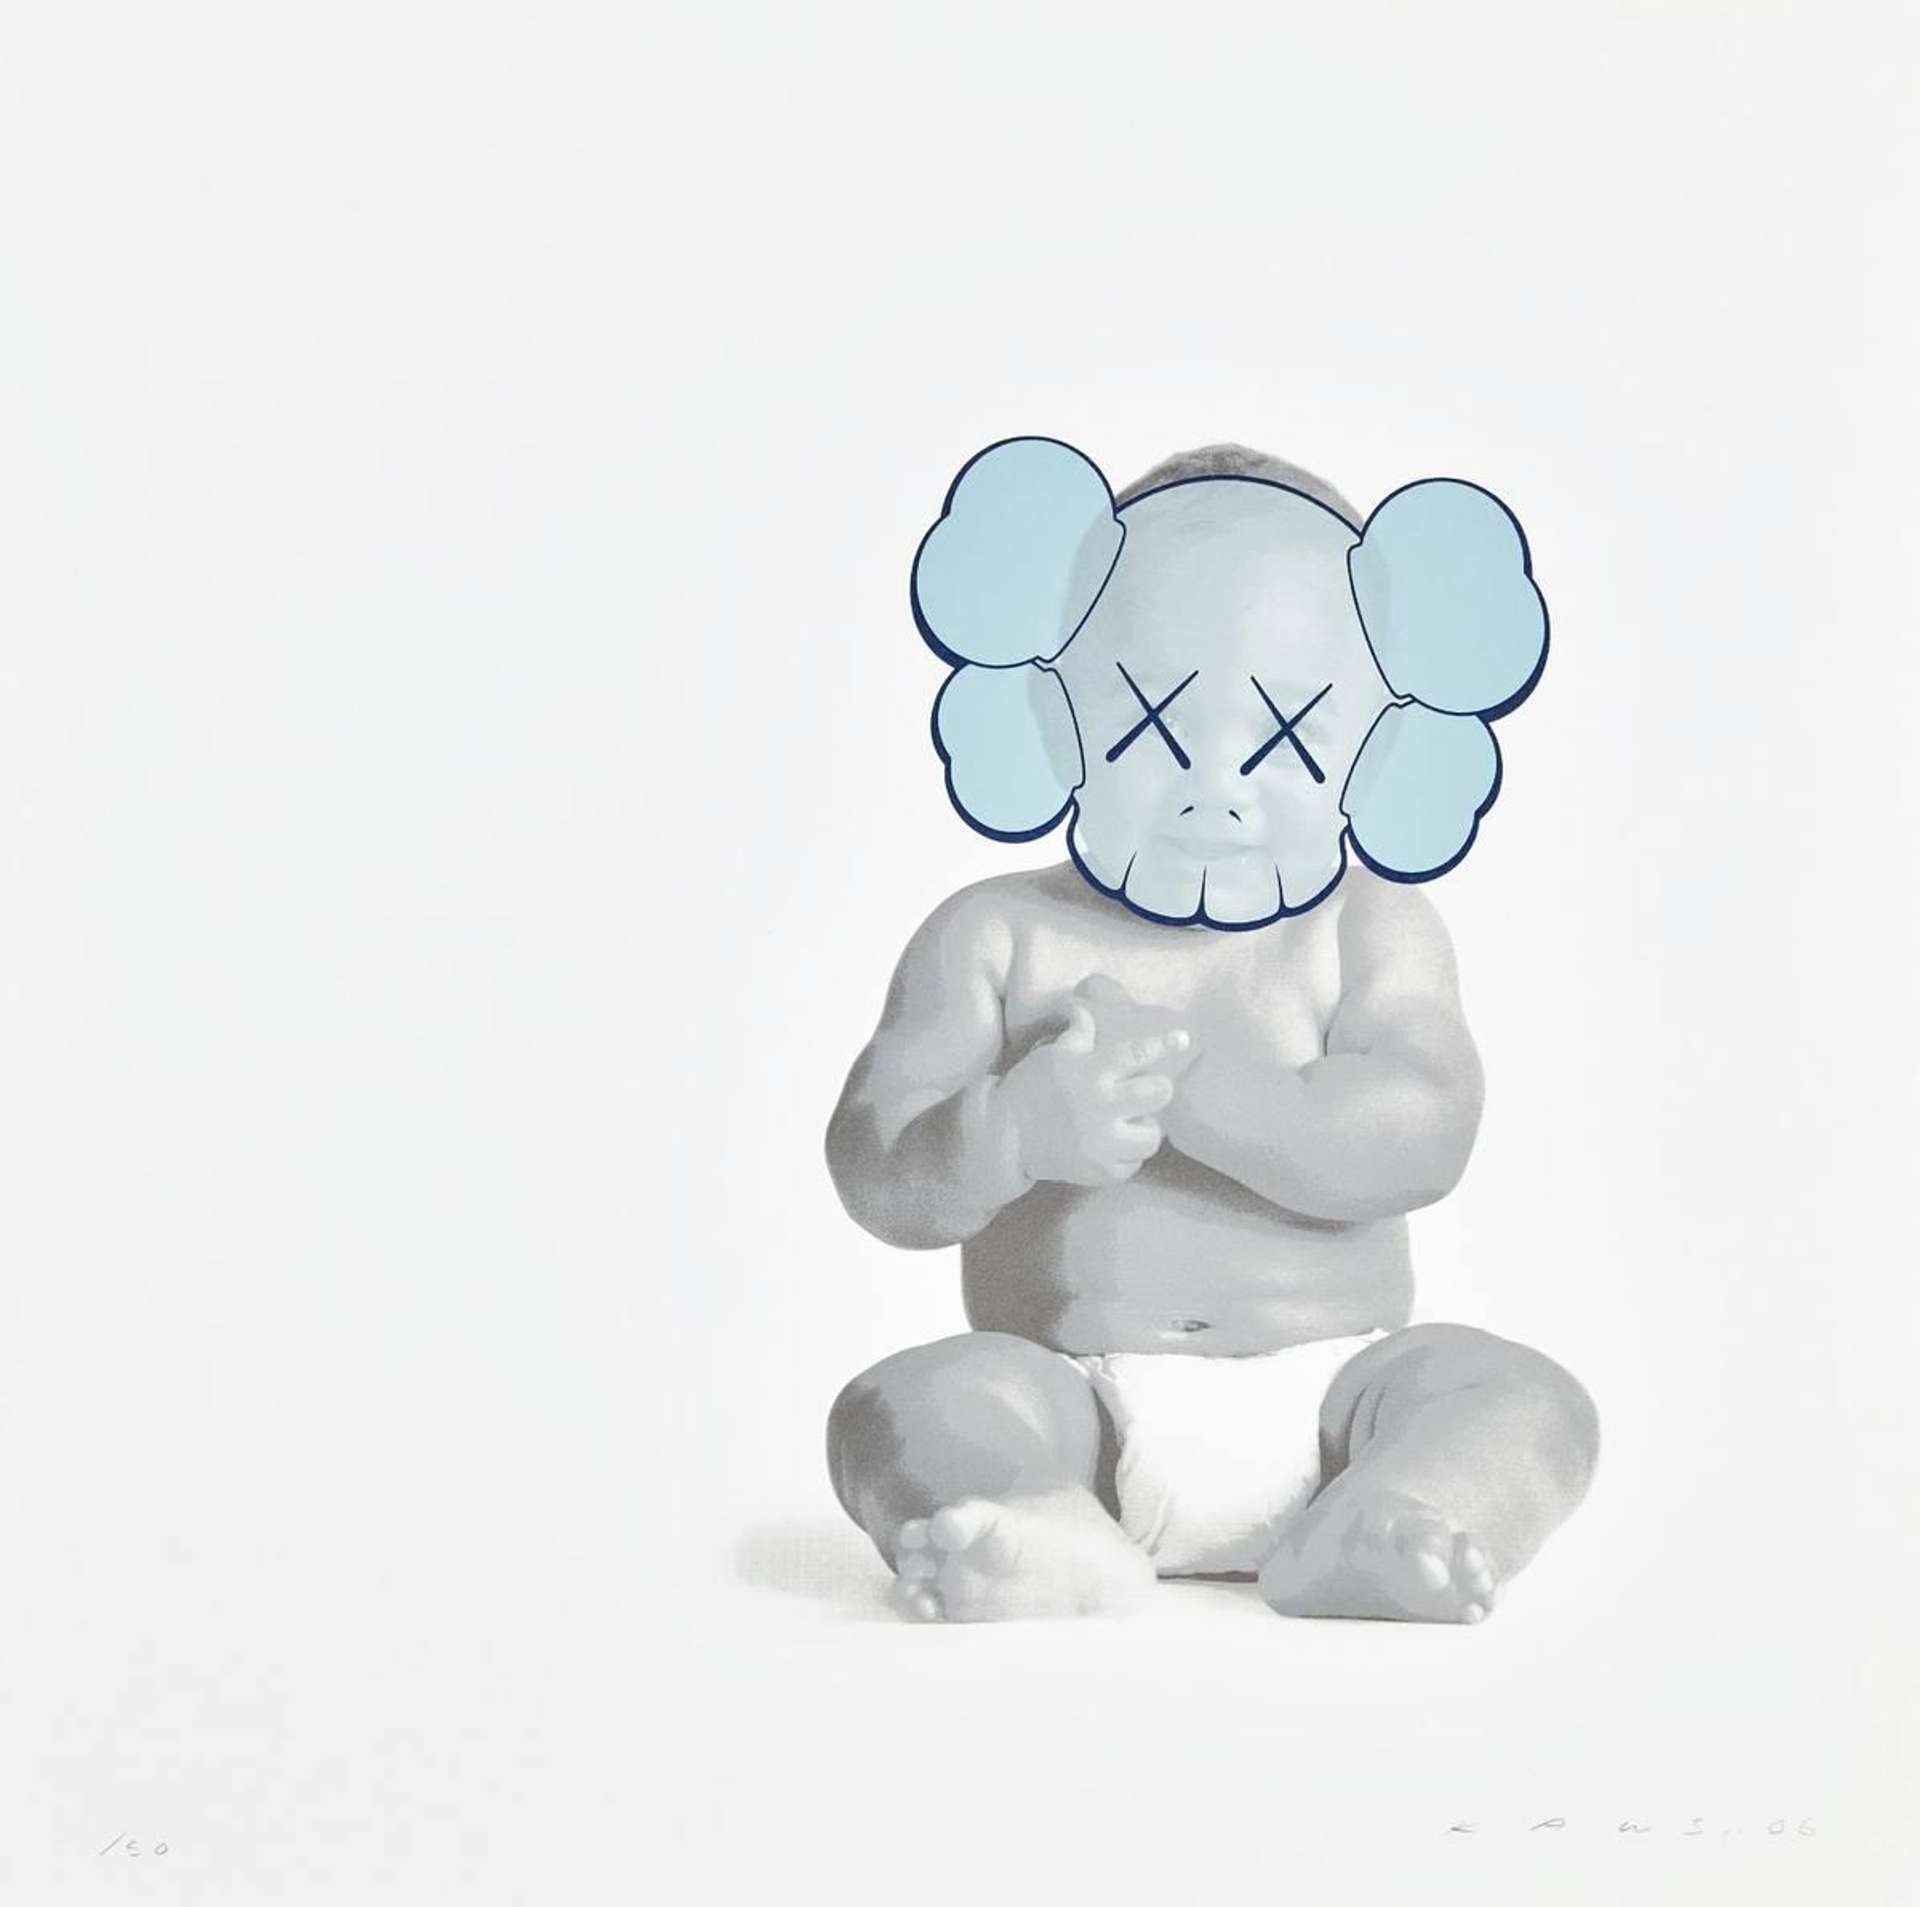 Where to Buy Authentic Kaws Artwork?, We Sell Awesome Art